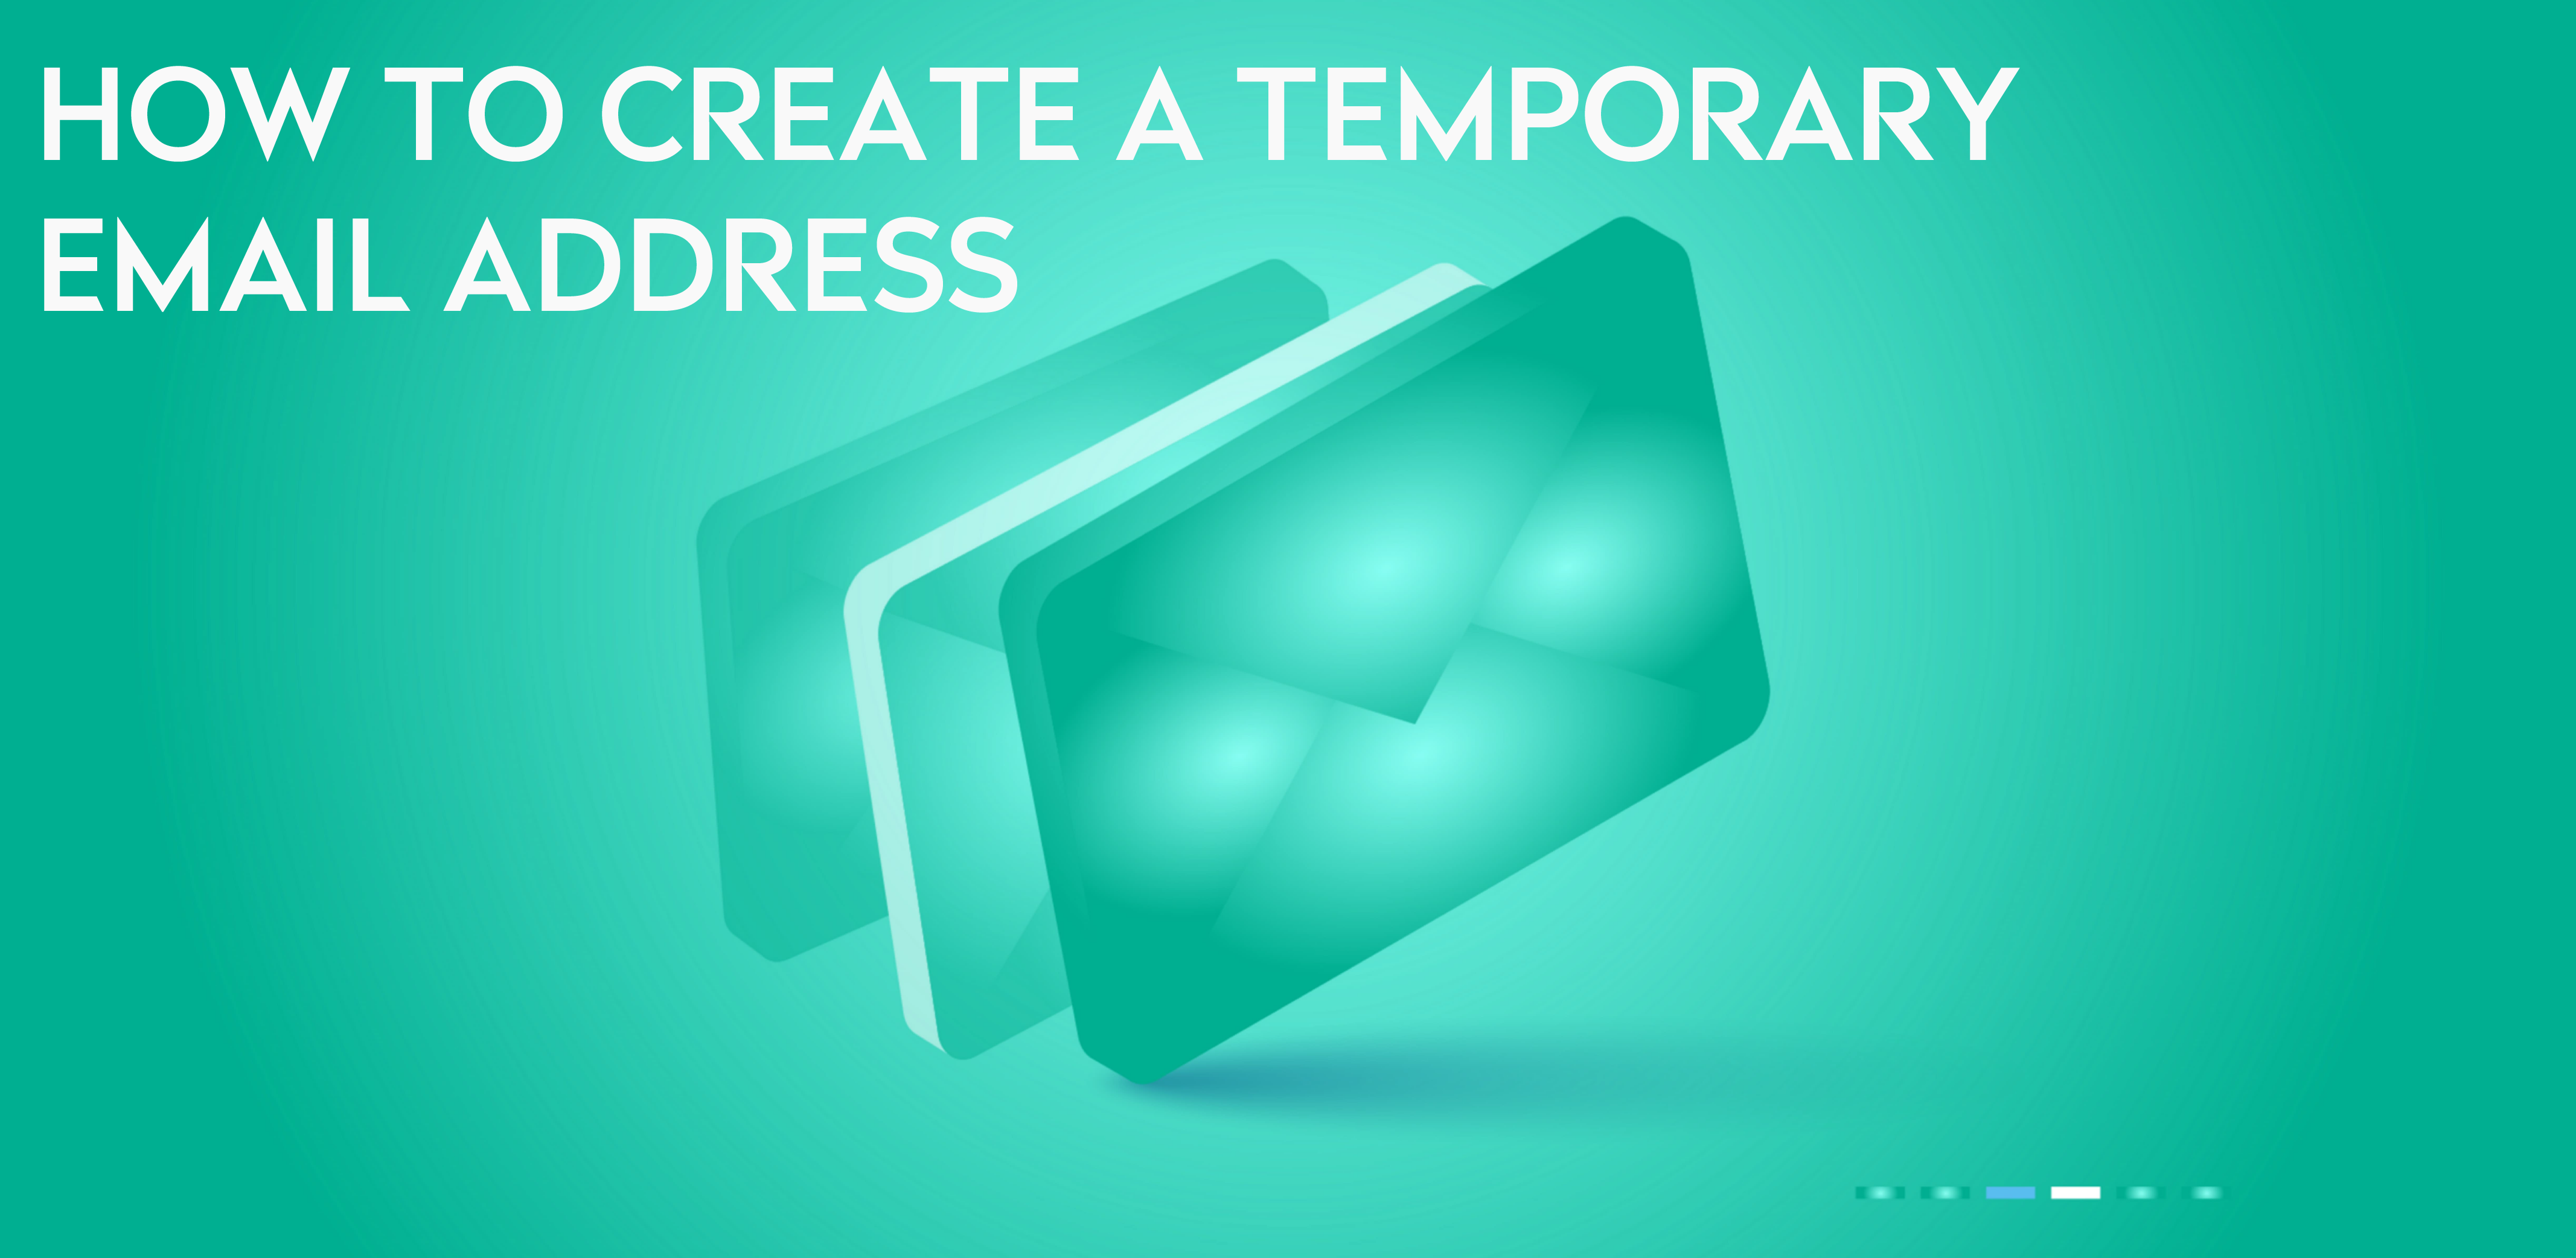 How To Create A Temporary Email Address